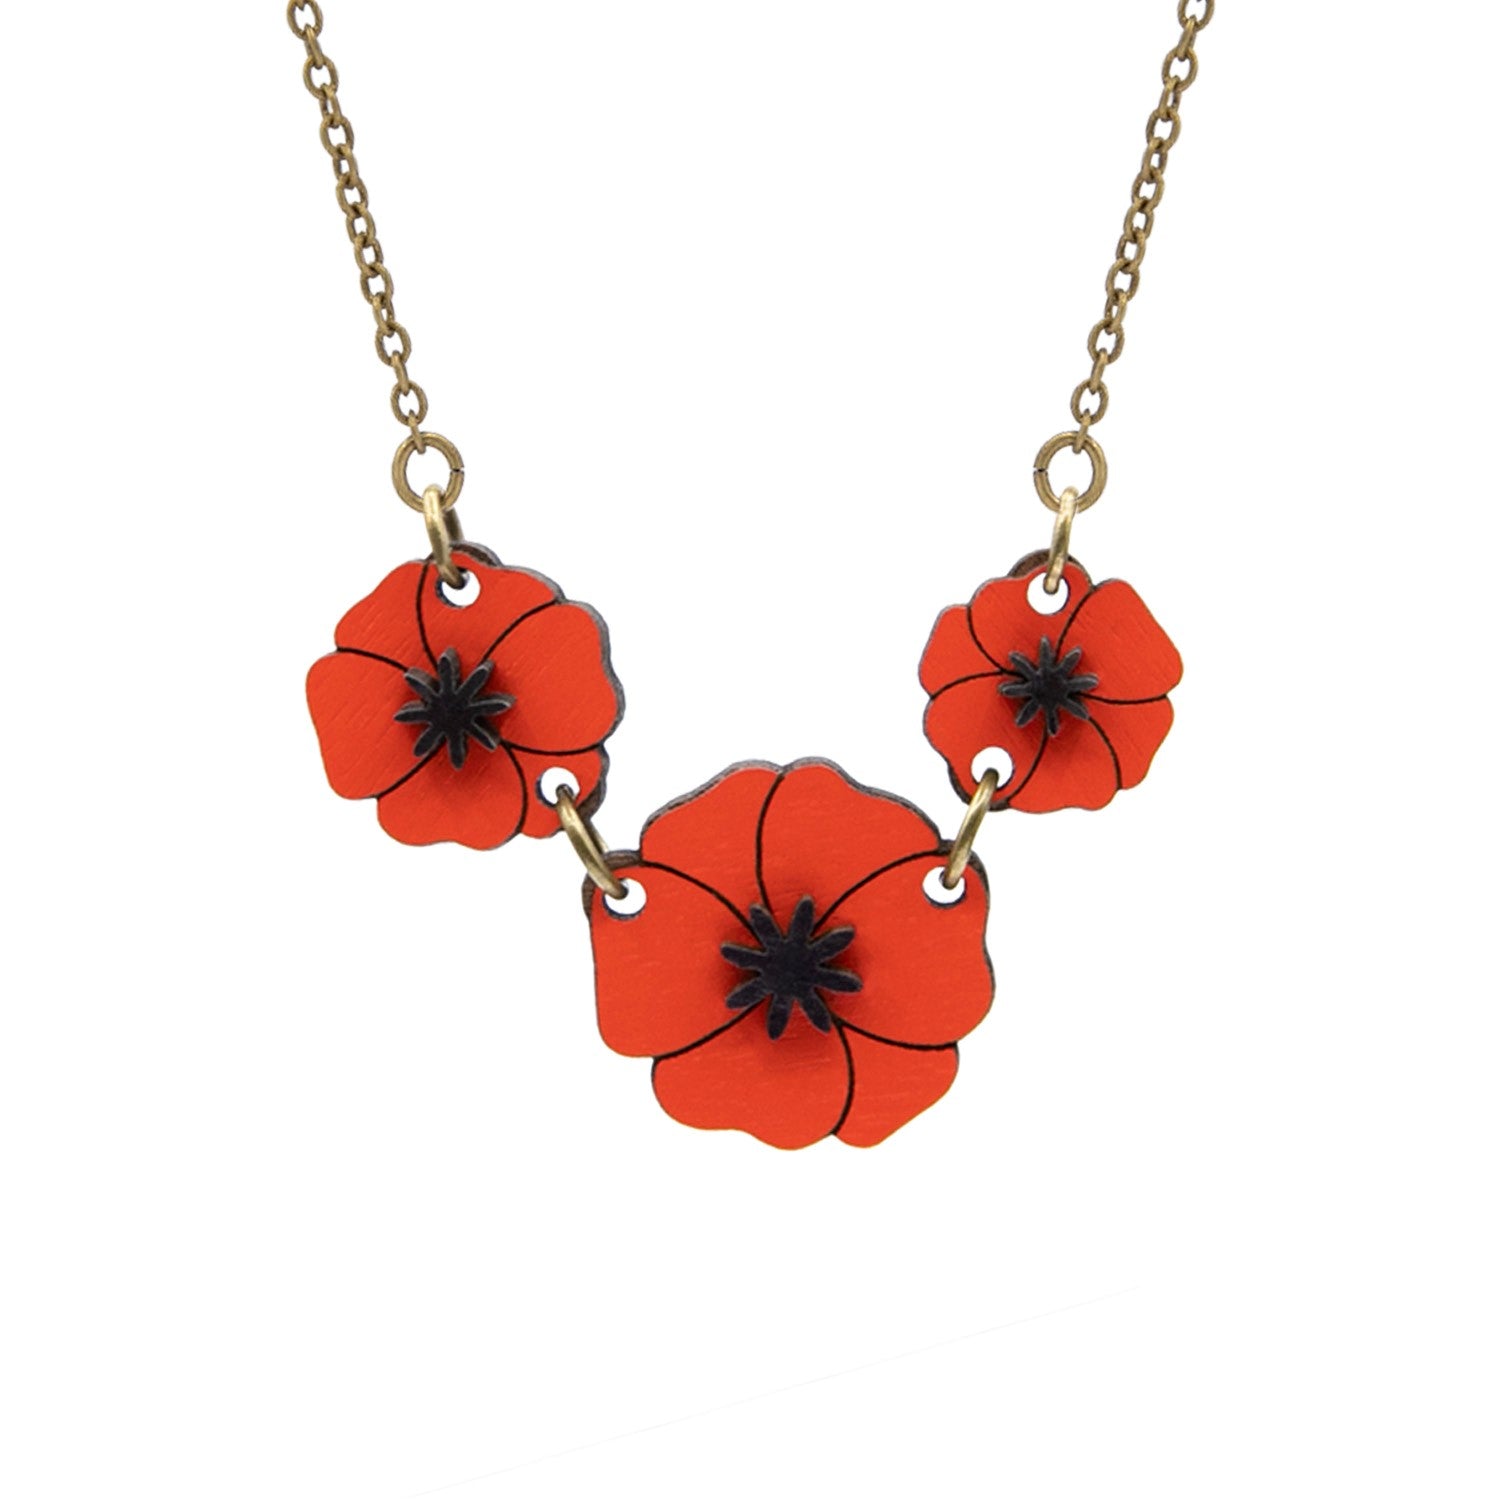 Three Little Poppies Necklace